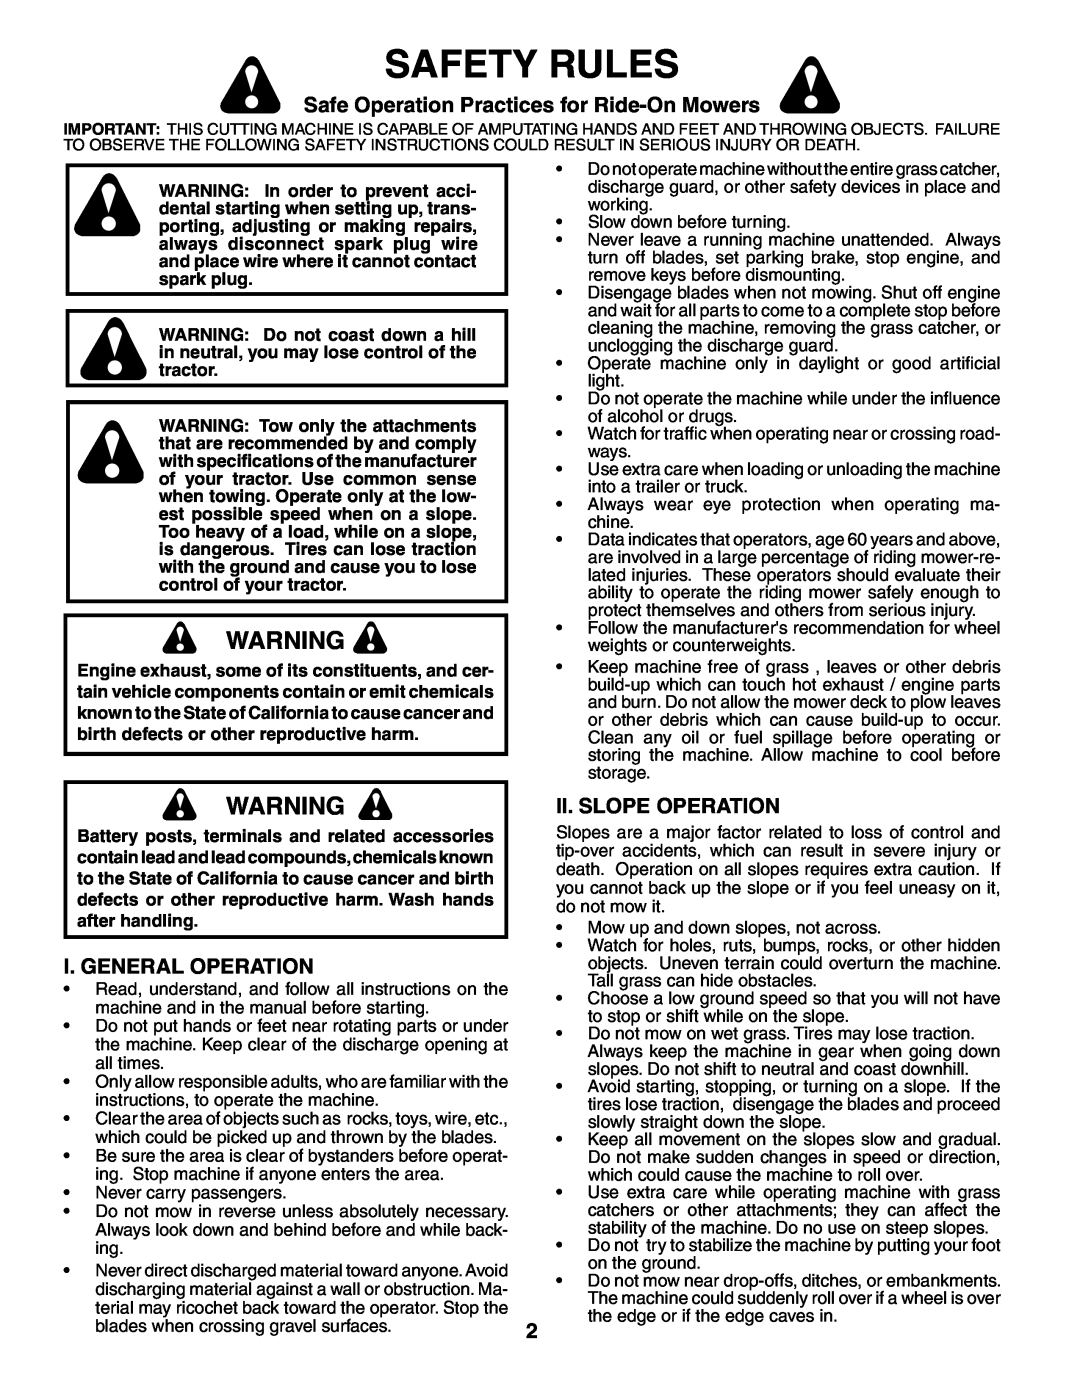 Weed Eater 403284 Safety Rules, Safe Operation Practices for Ride-On Mowers, I. General Operation, Ii. Slope Operation 